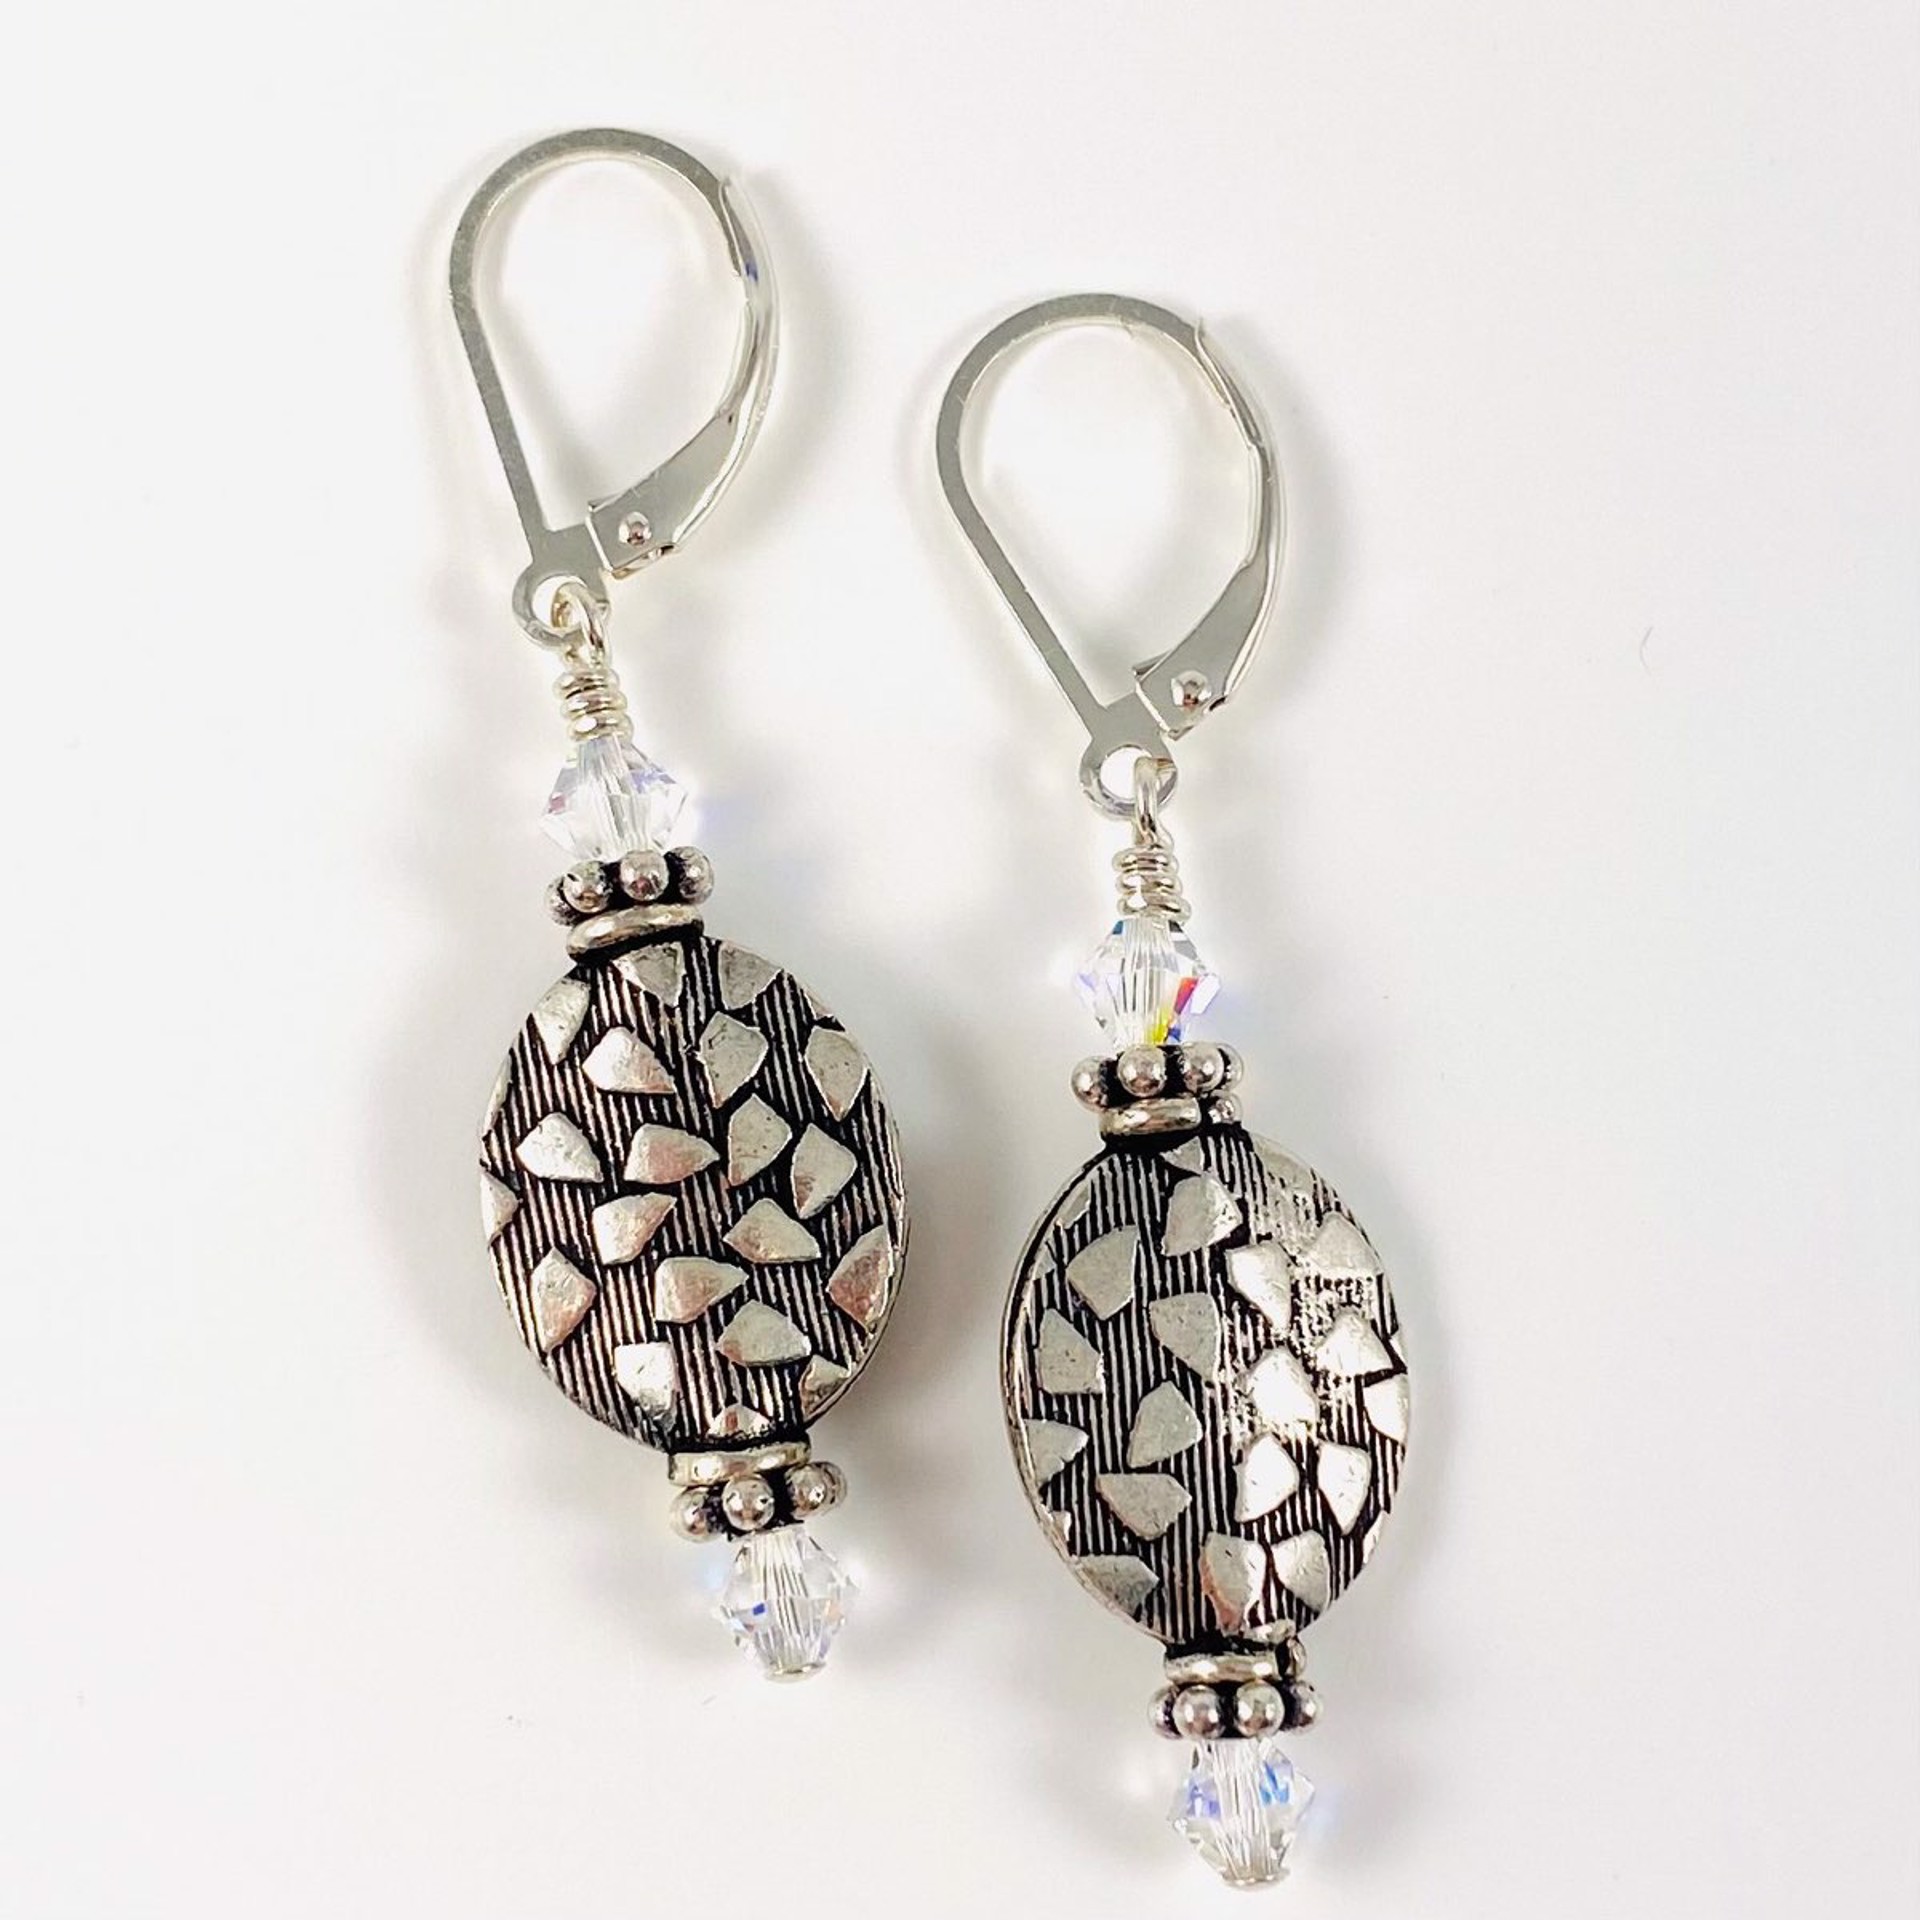 Silver and Crystal Earrings SHOSH21-2 by Shoshannah Weinisch